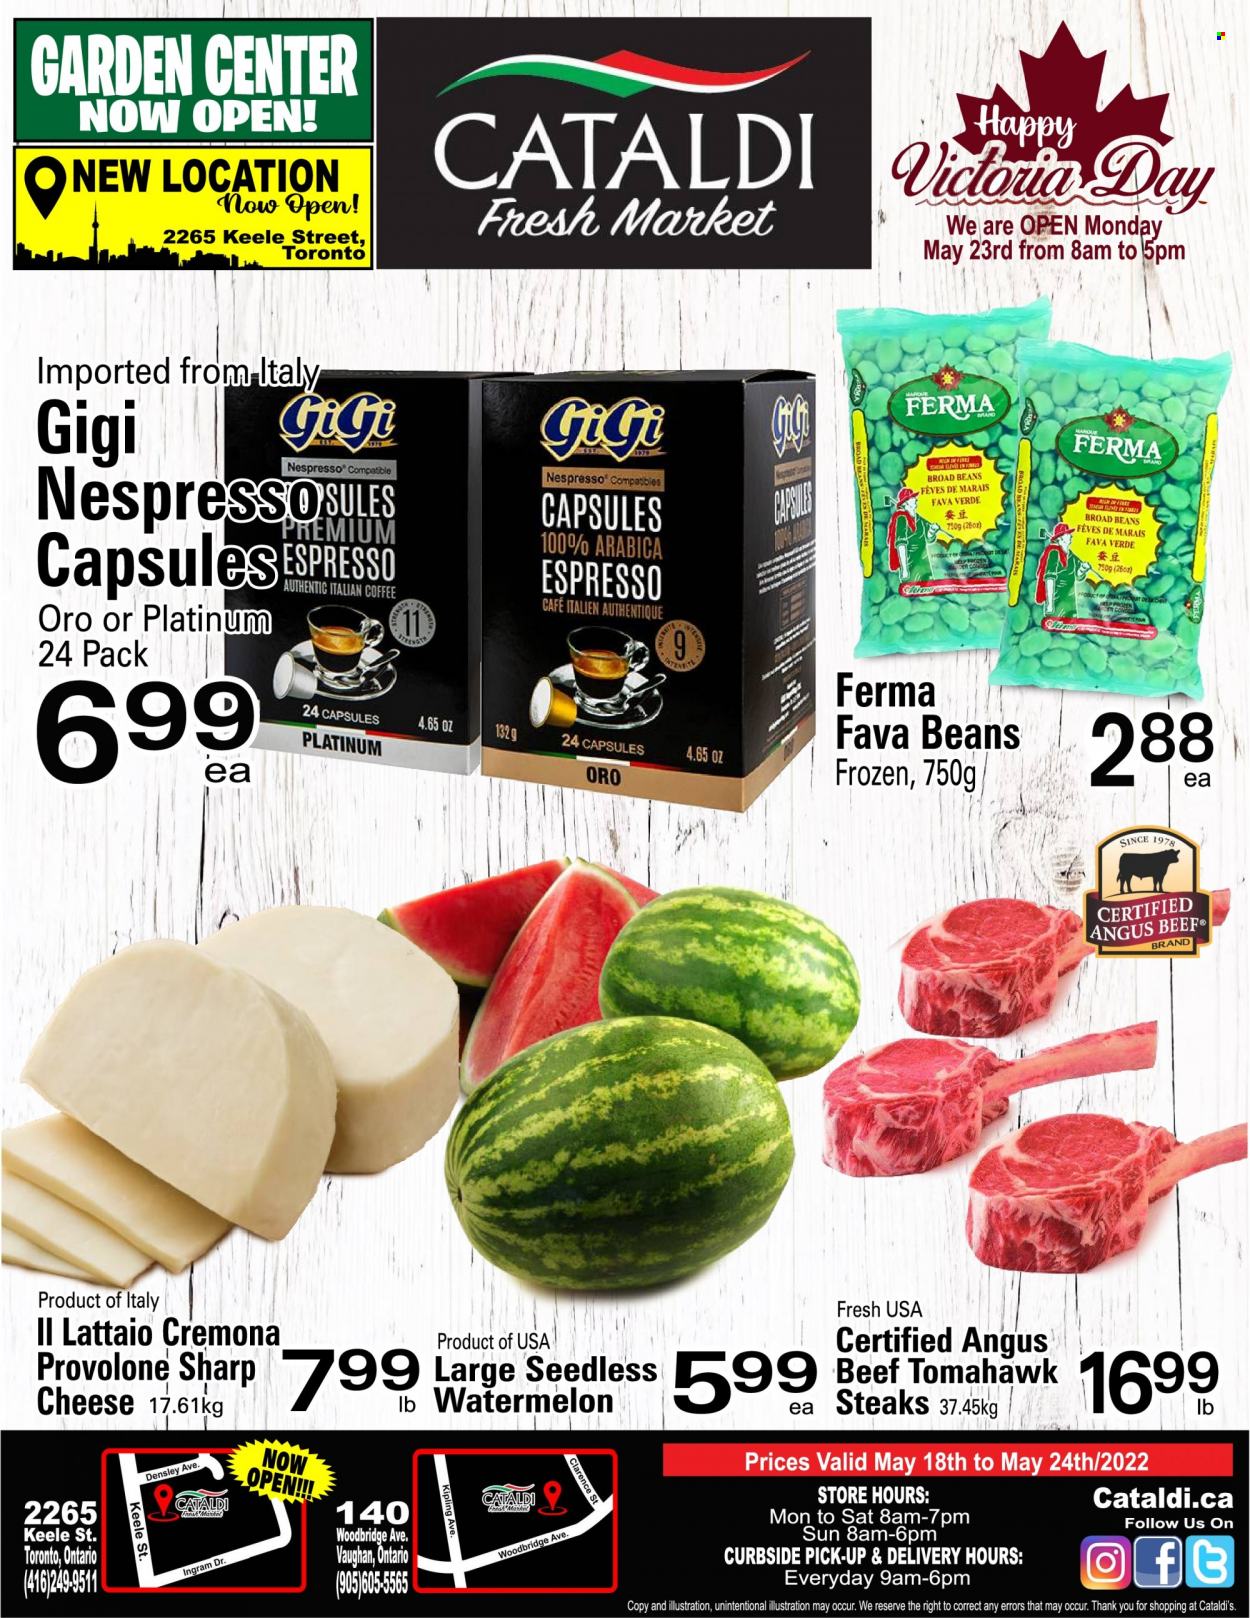 thumbnail - Cataldi Fresh Market Flyer - May 18, 2022 - May 24, 2022 - Sales products - fava beans, watermelon, cheese, Provolone, coffee, Nespresso, Woodbridge, beef meat, tomahawk steak, steak. Page 1.